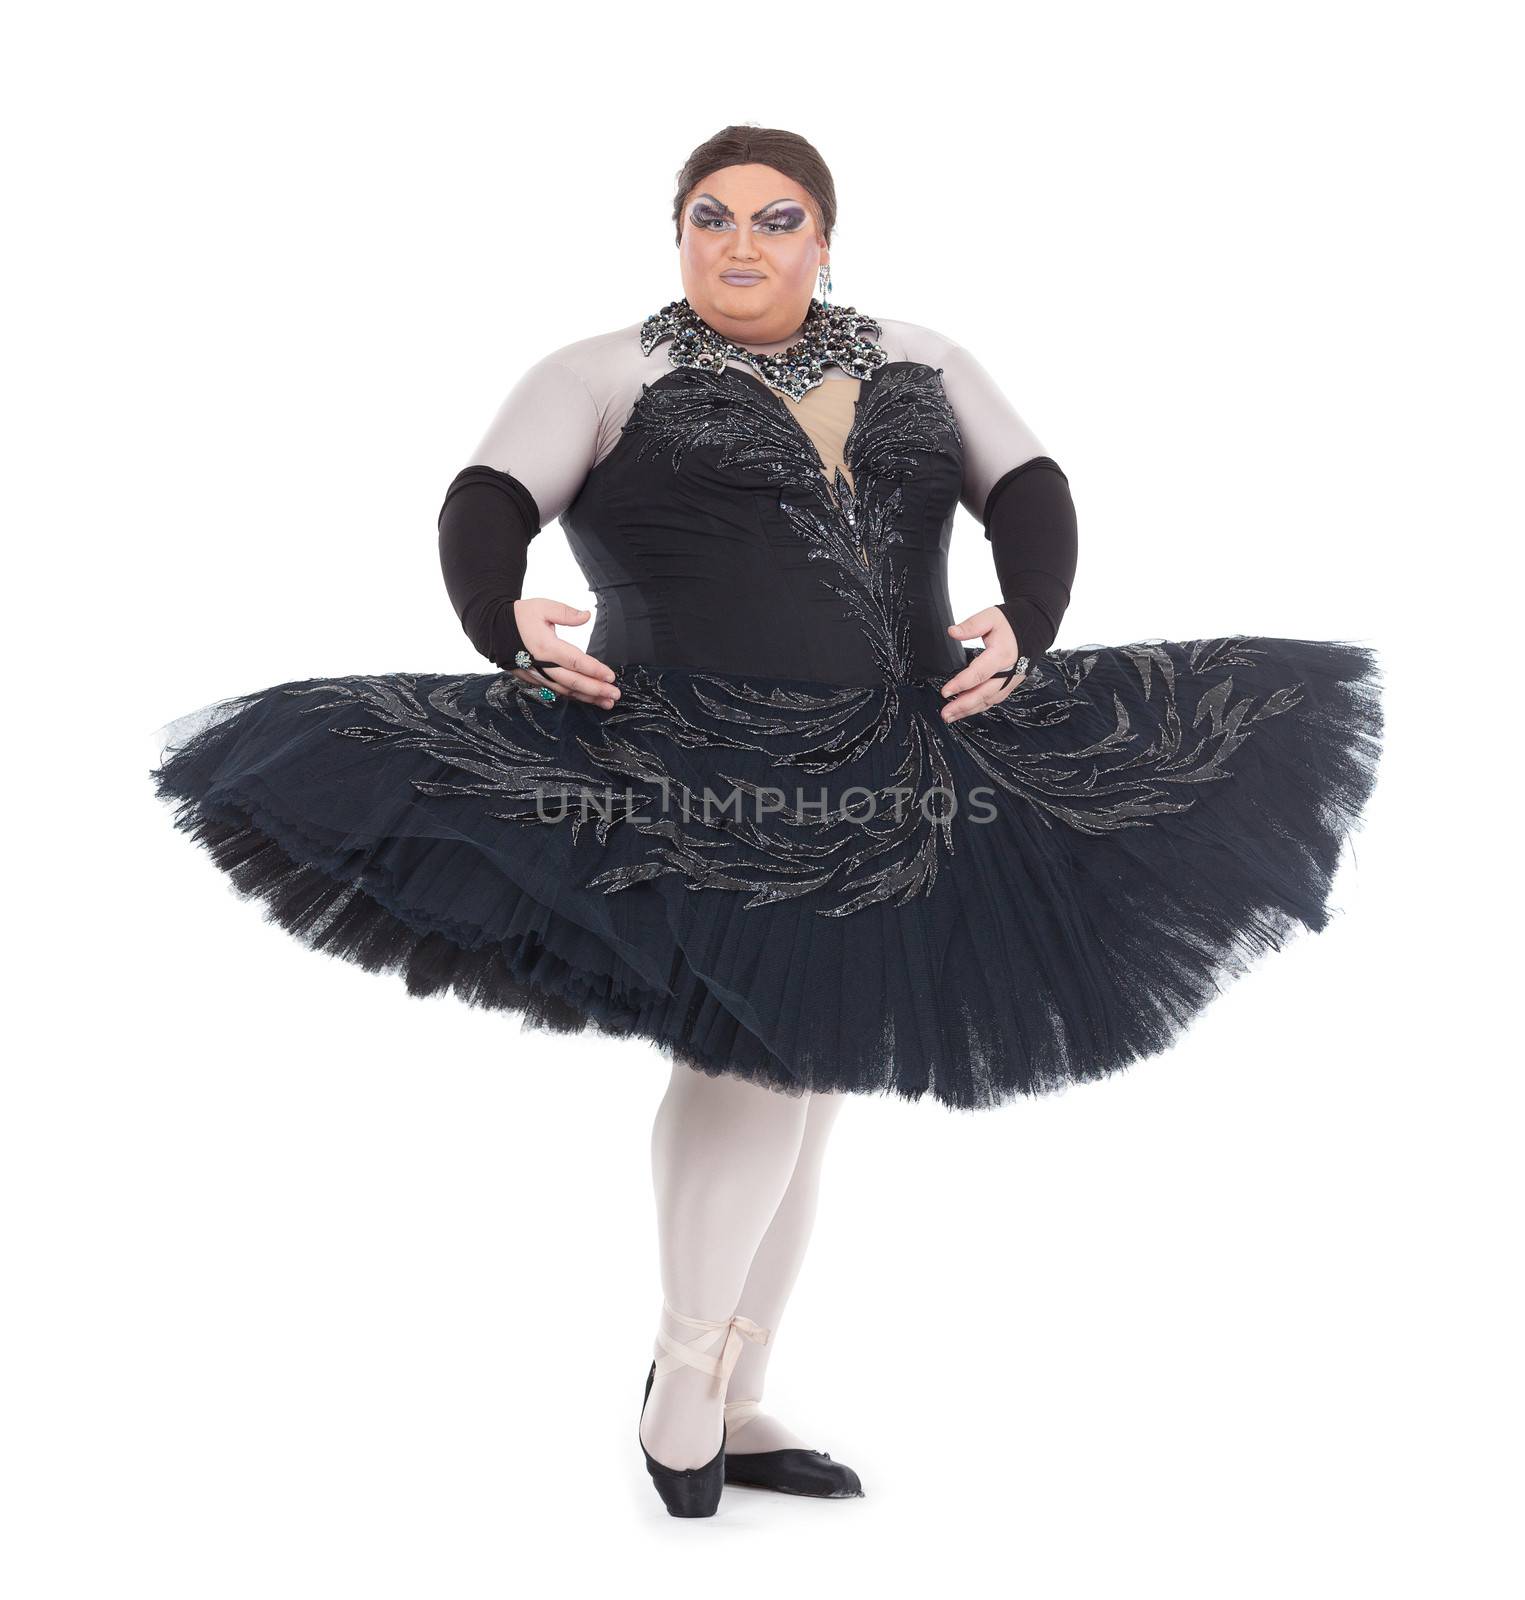 Drag queen dancing in a tutu by Discovod